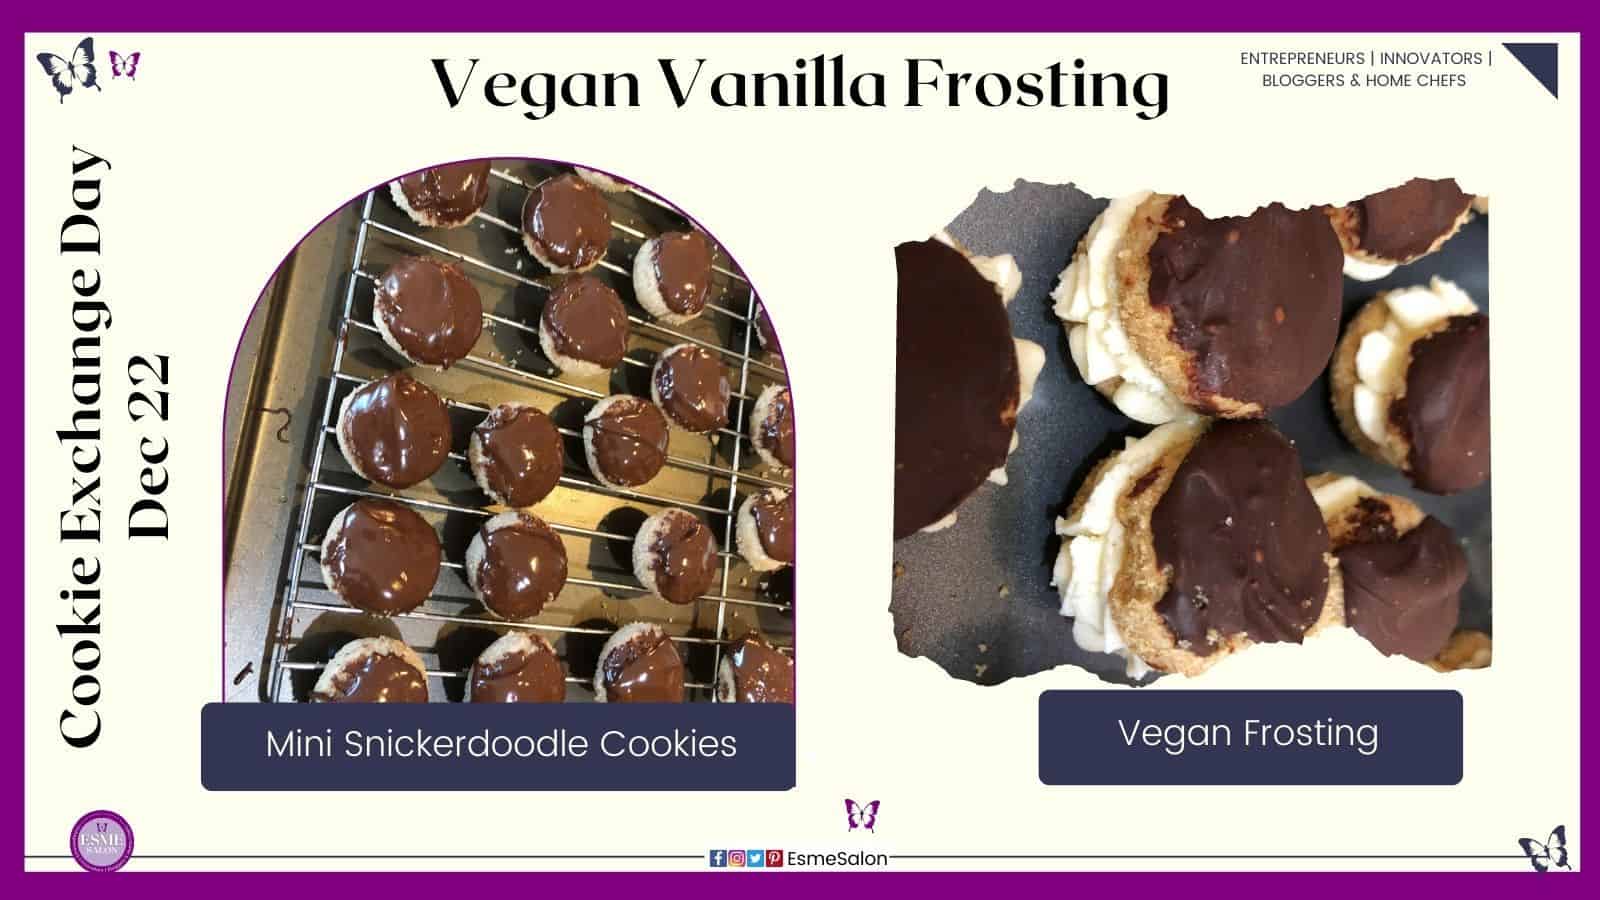 an image of vegan snickerdoodle cookies with vegan frosting and vegan chocolate